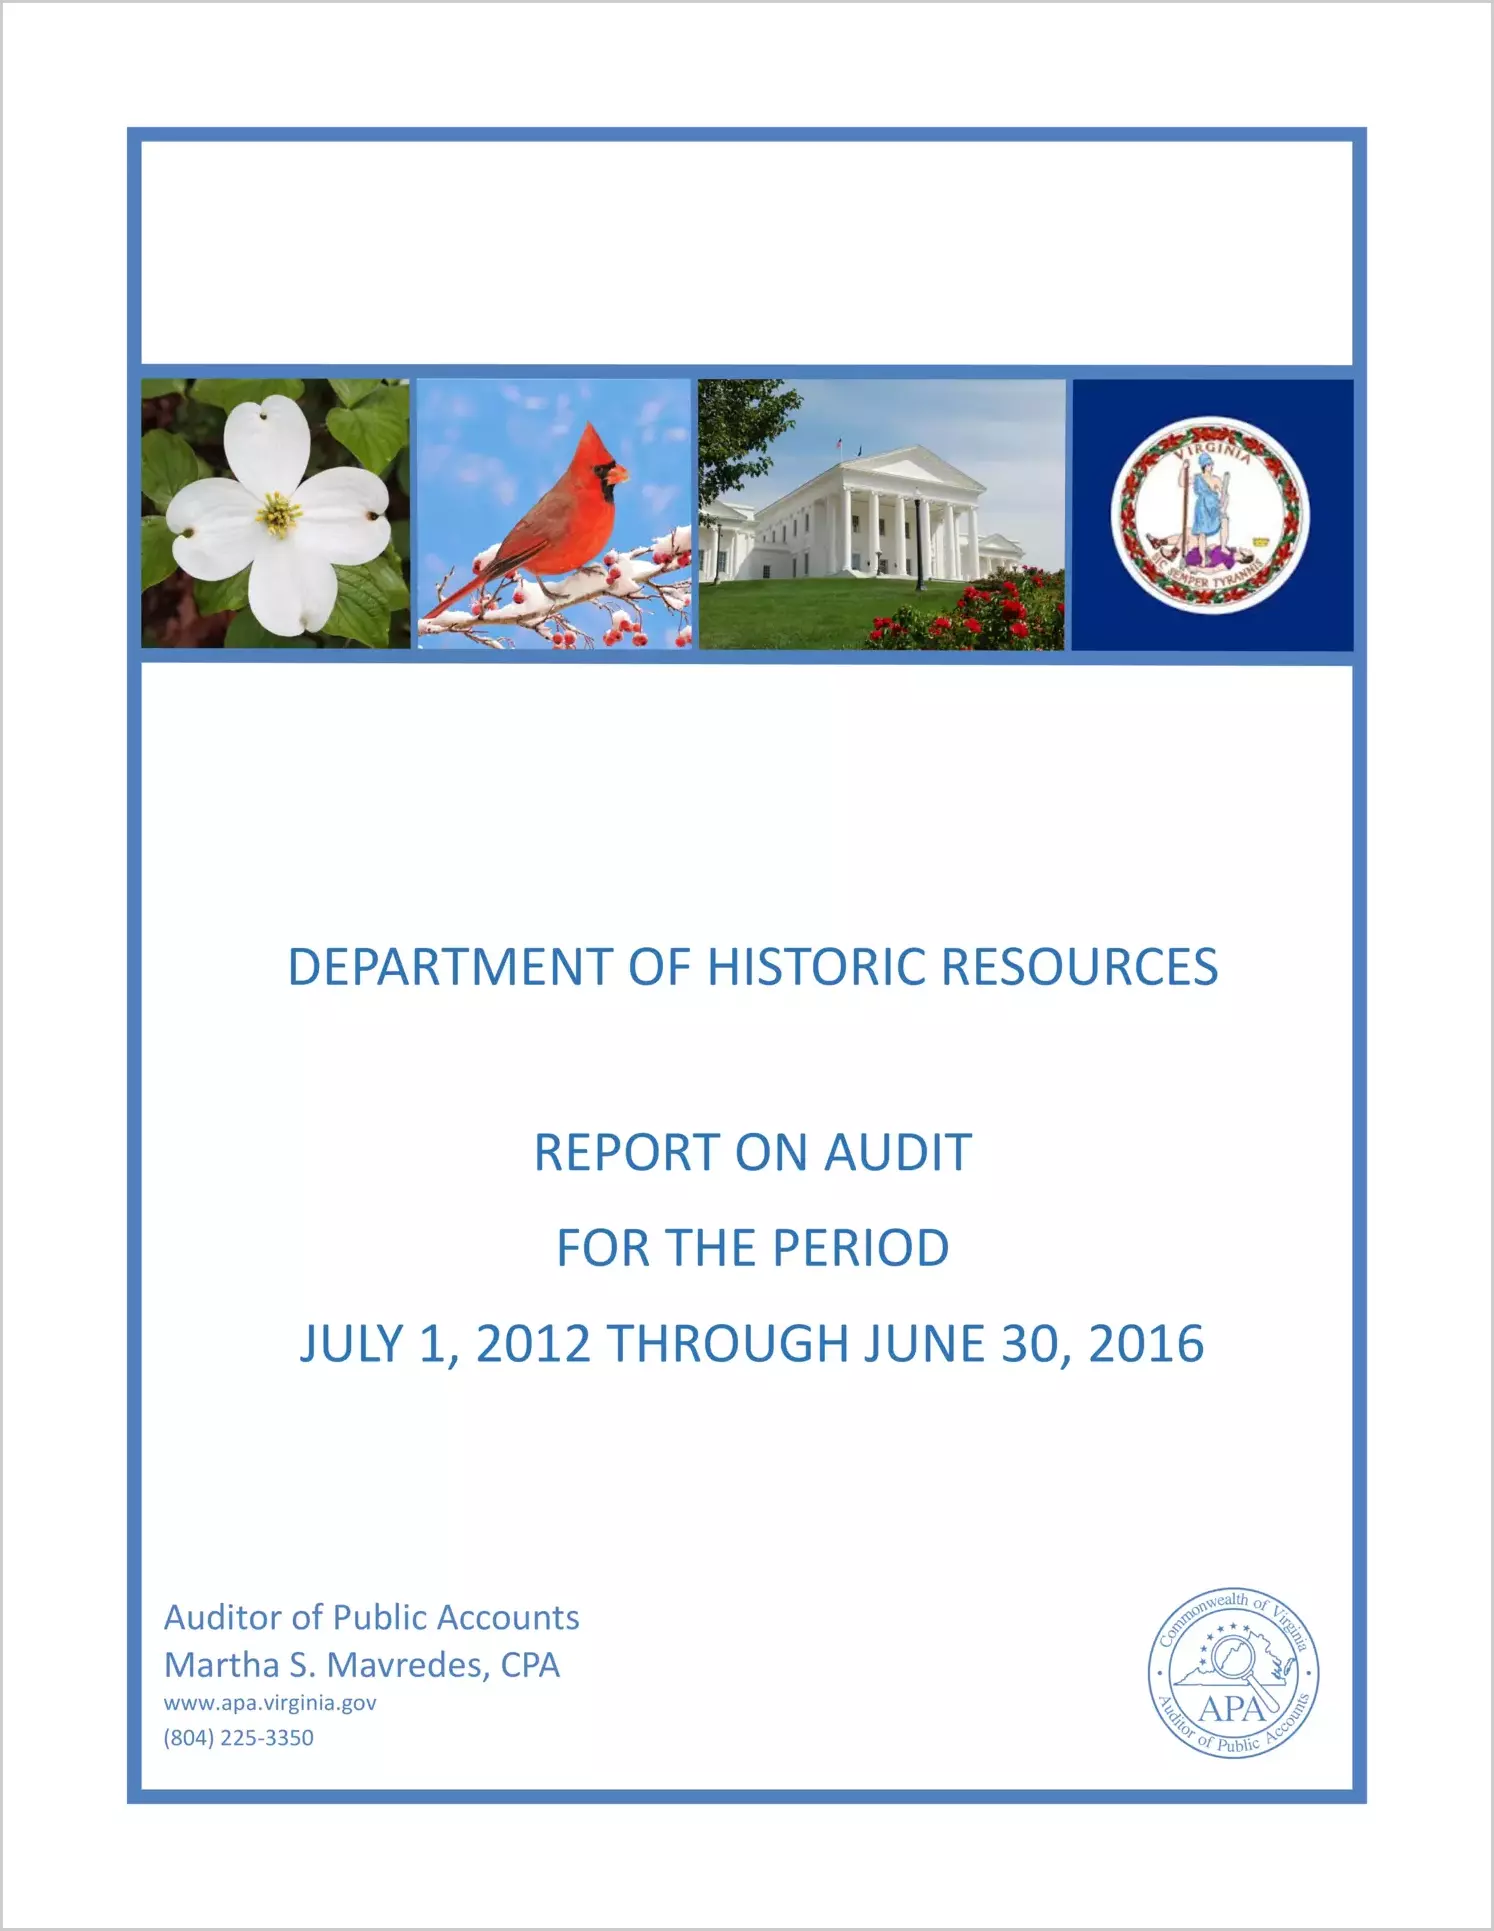 Department of Historic Resources for the period July 1, 2012 through June 30, 2016